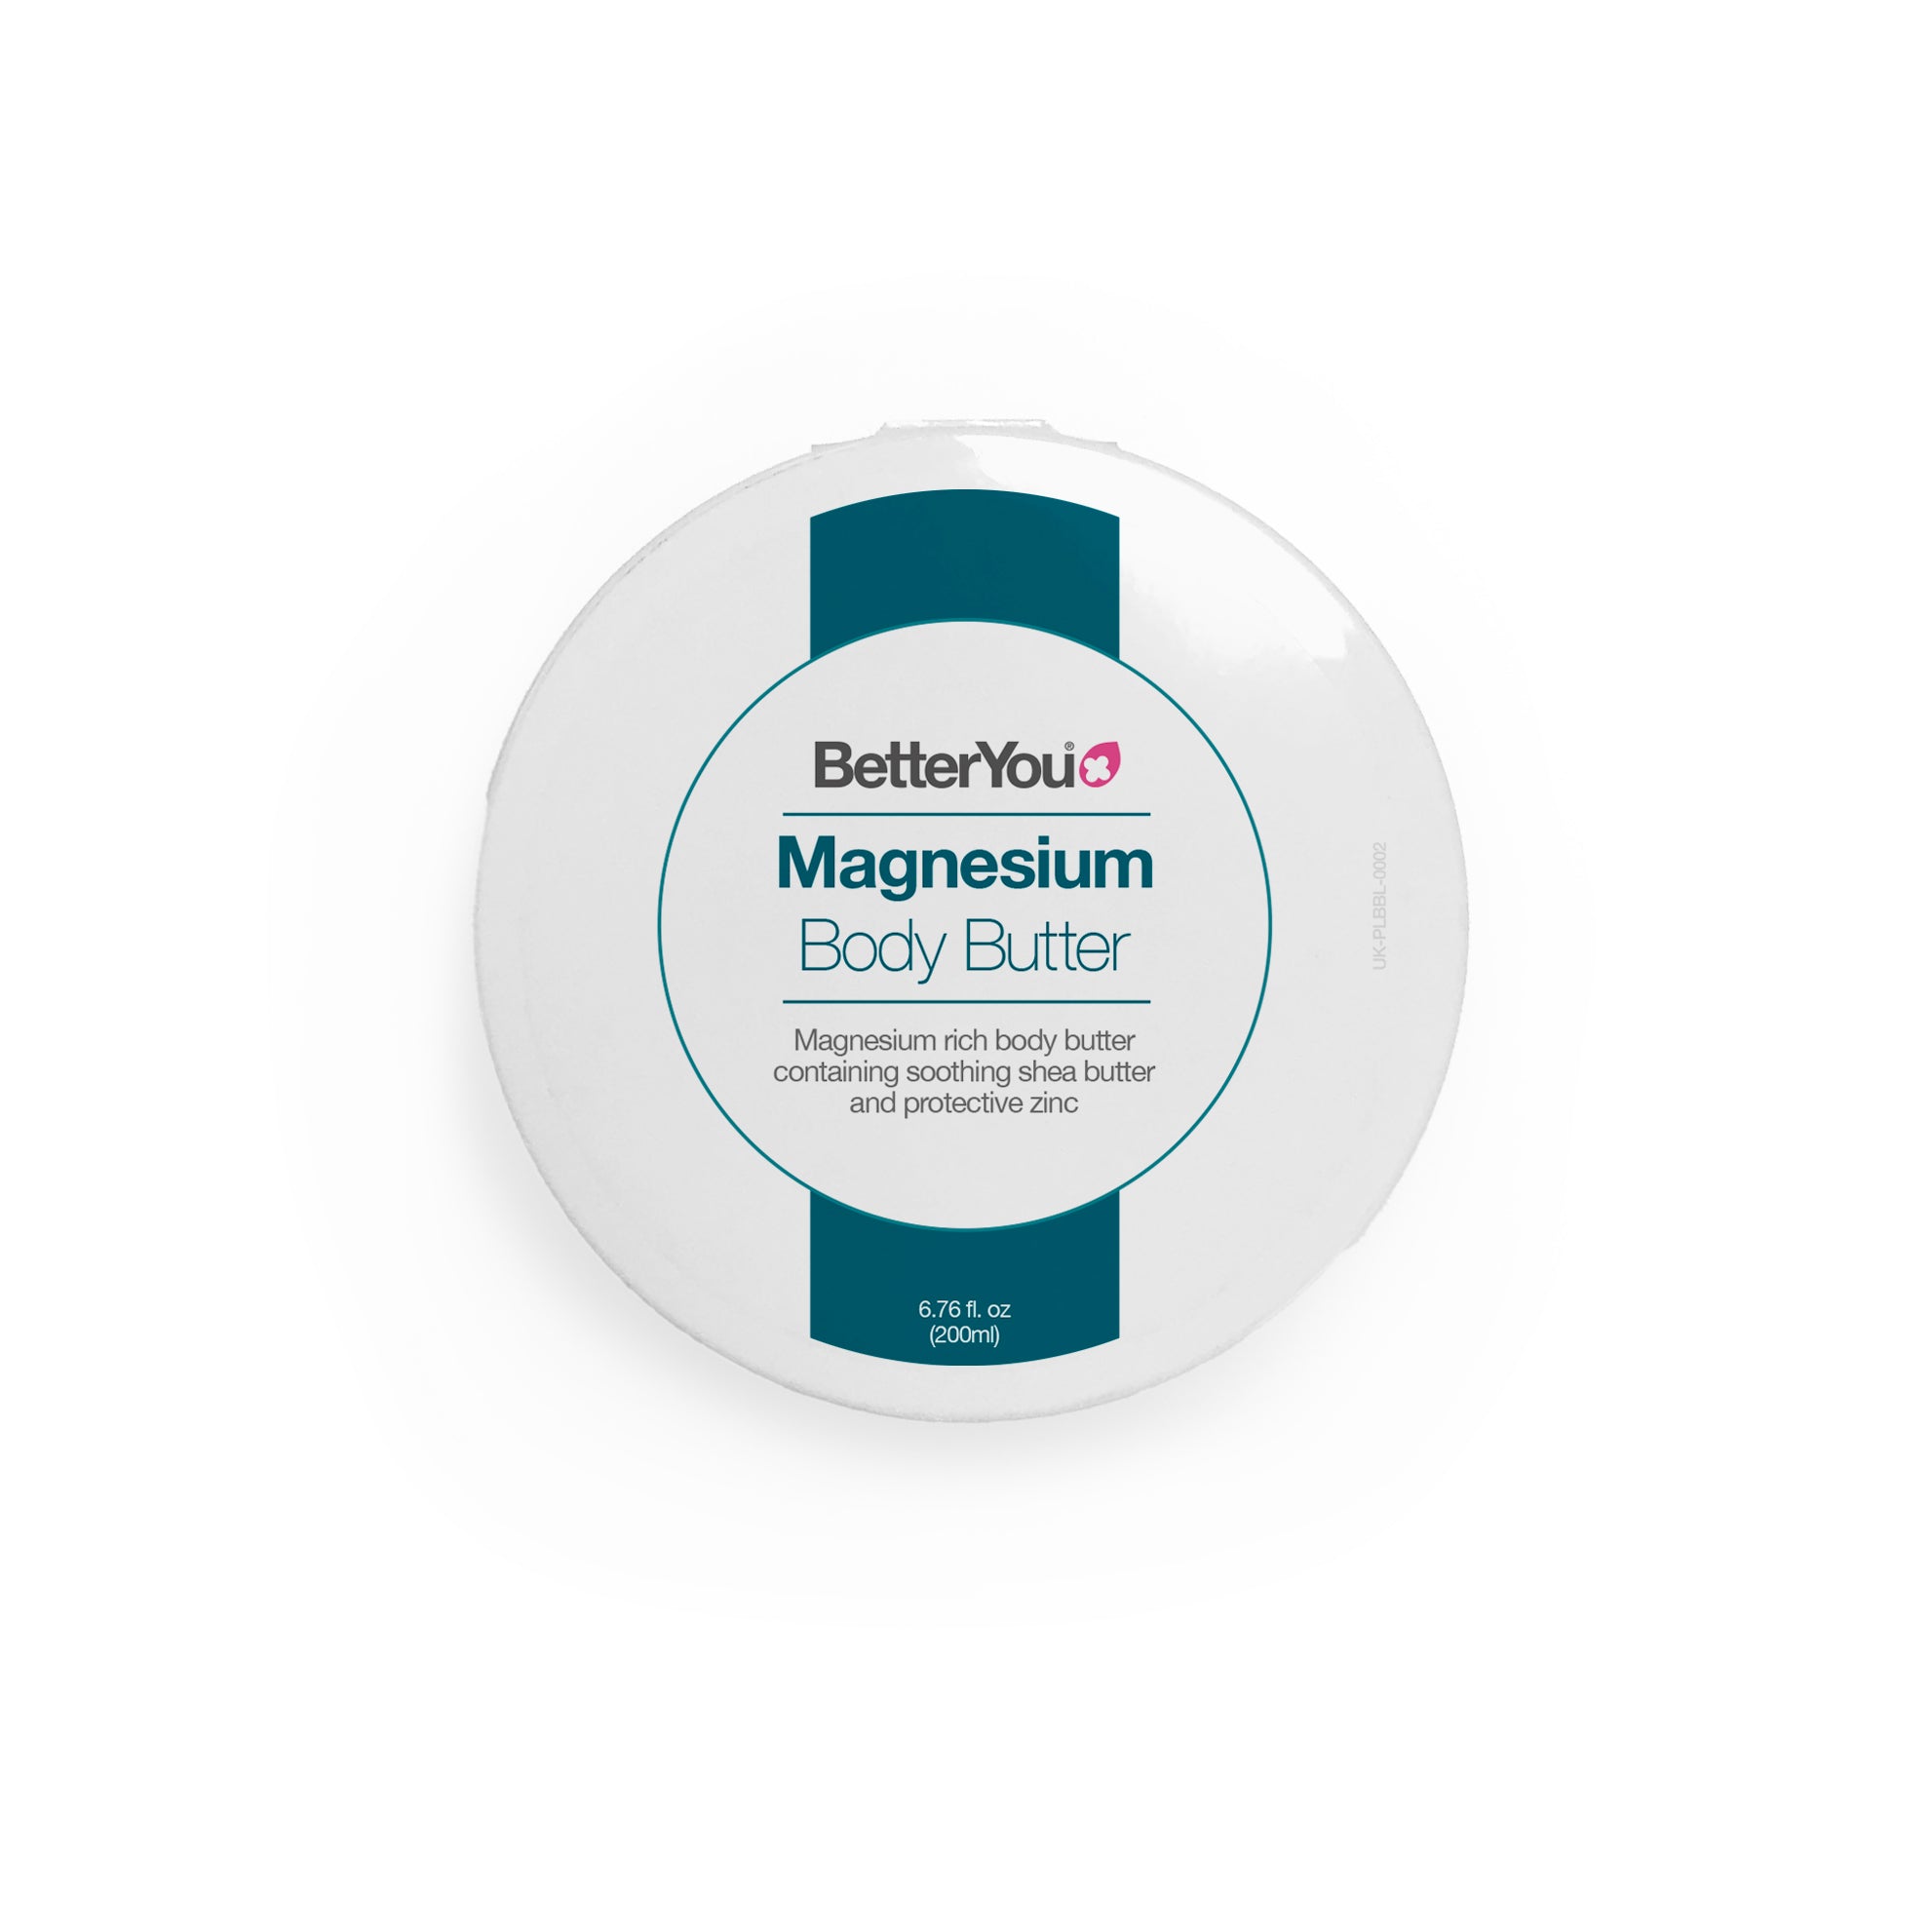 BetterYou Magnesium Body Butter